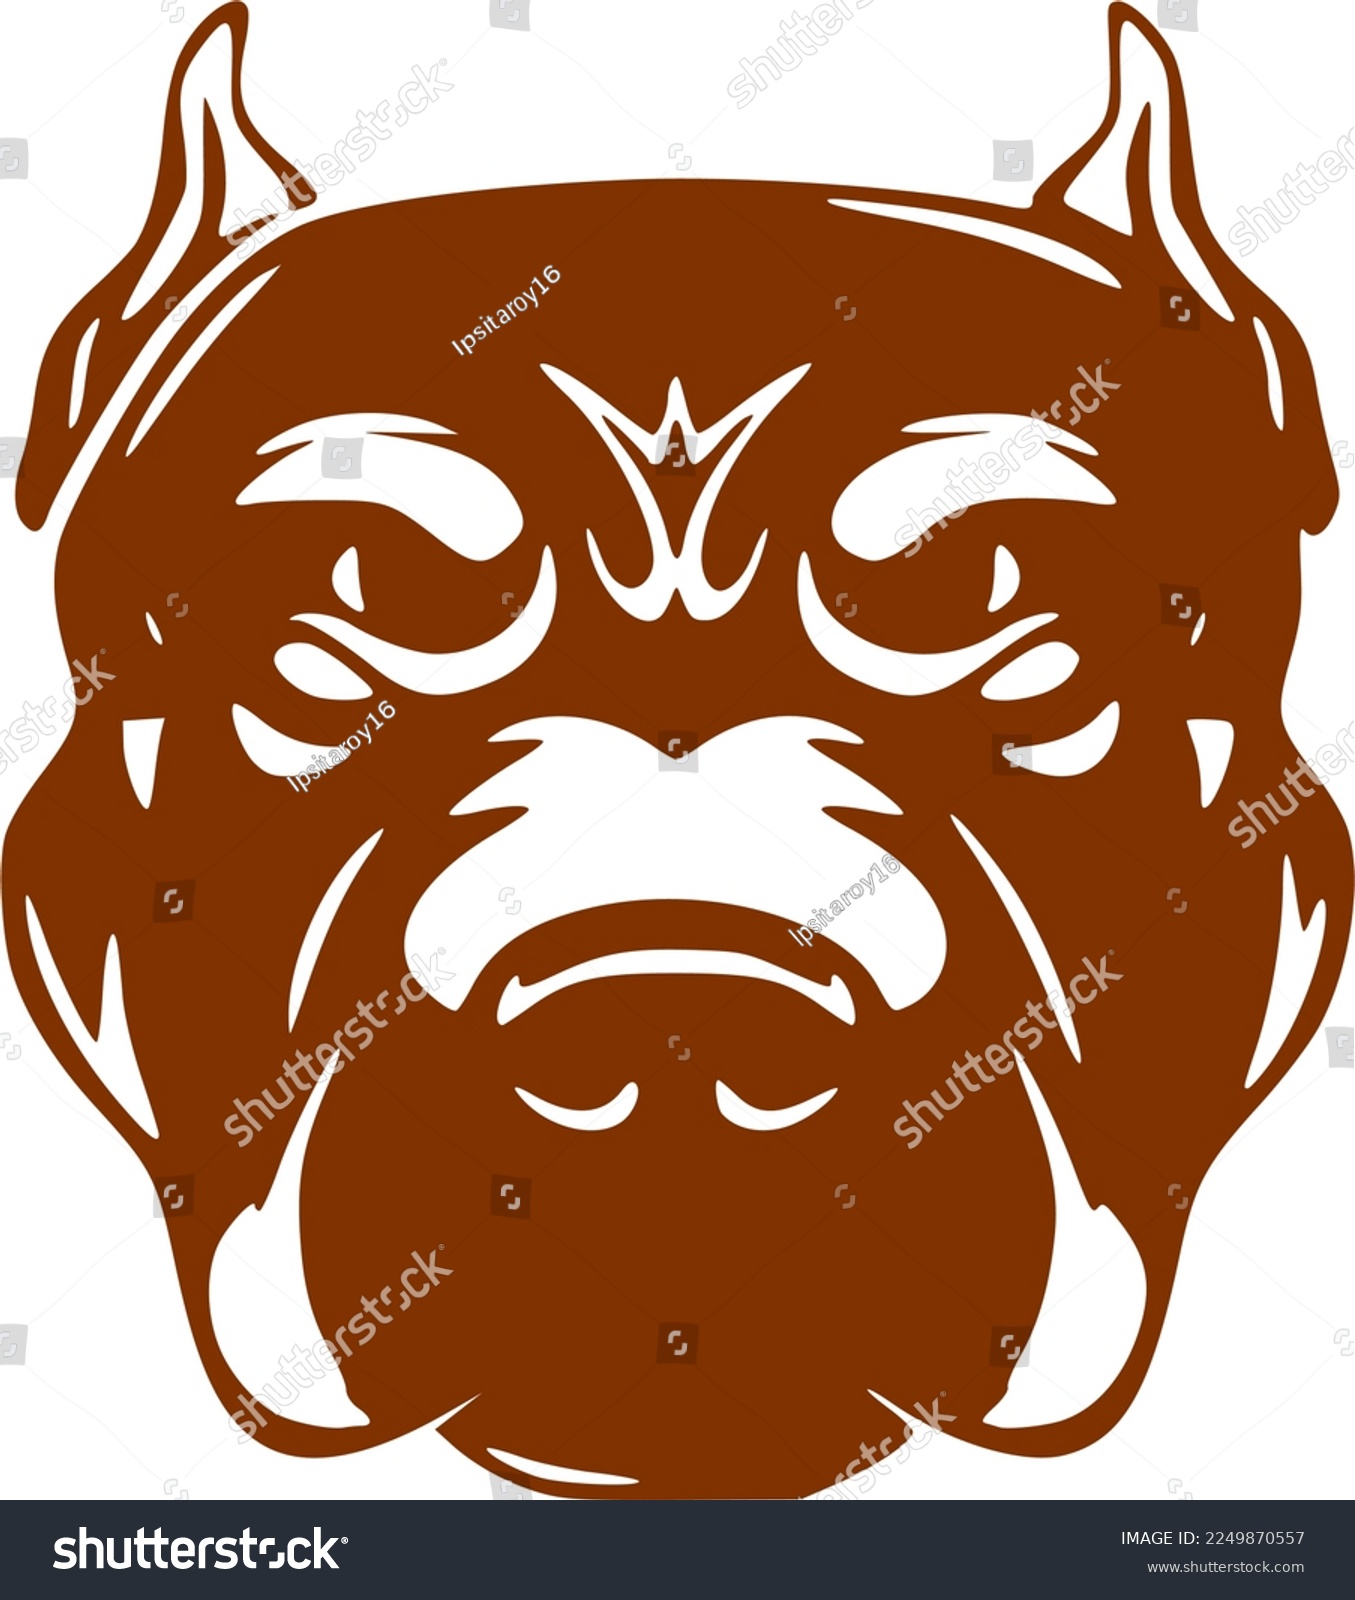 SVG of vector of a dog face svg